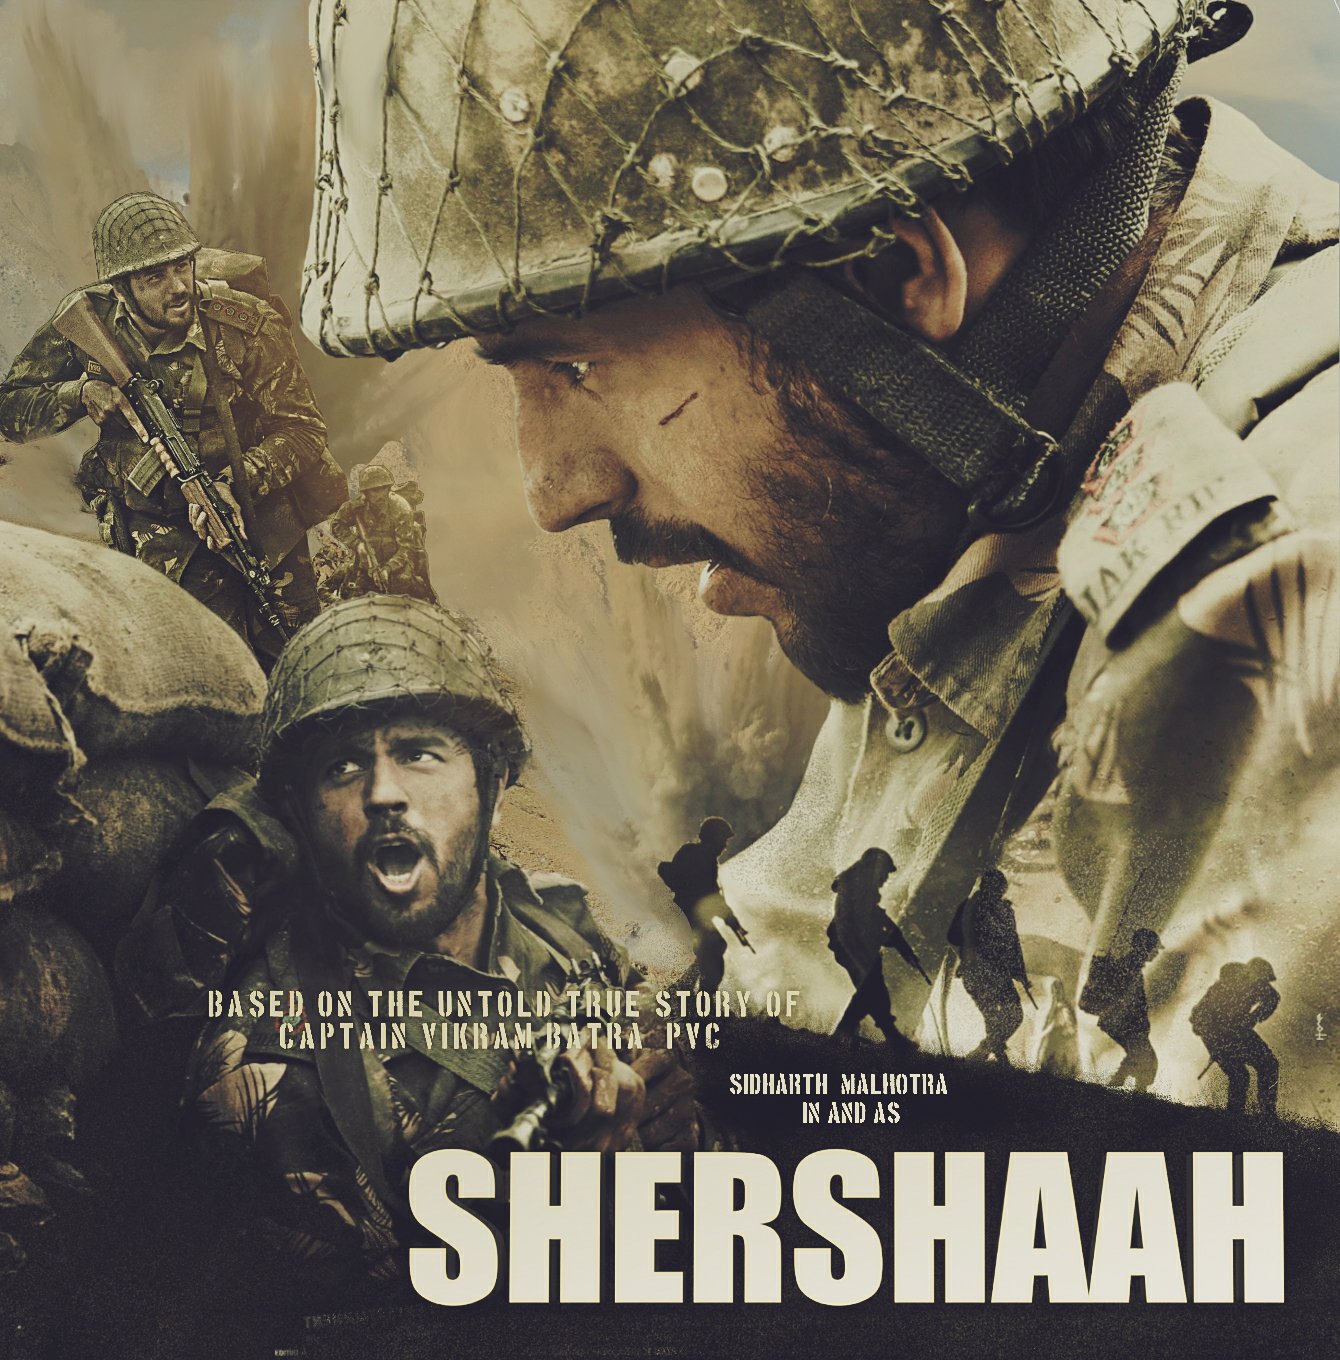 Shershaah Movie: Checkout The Cast, Release Date, Trailer, And More